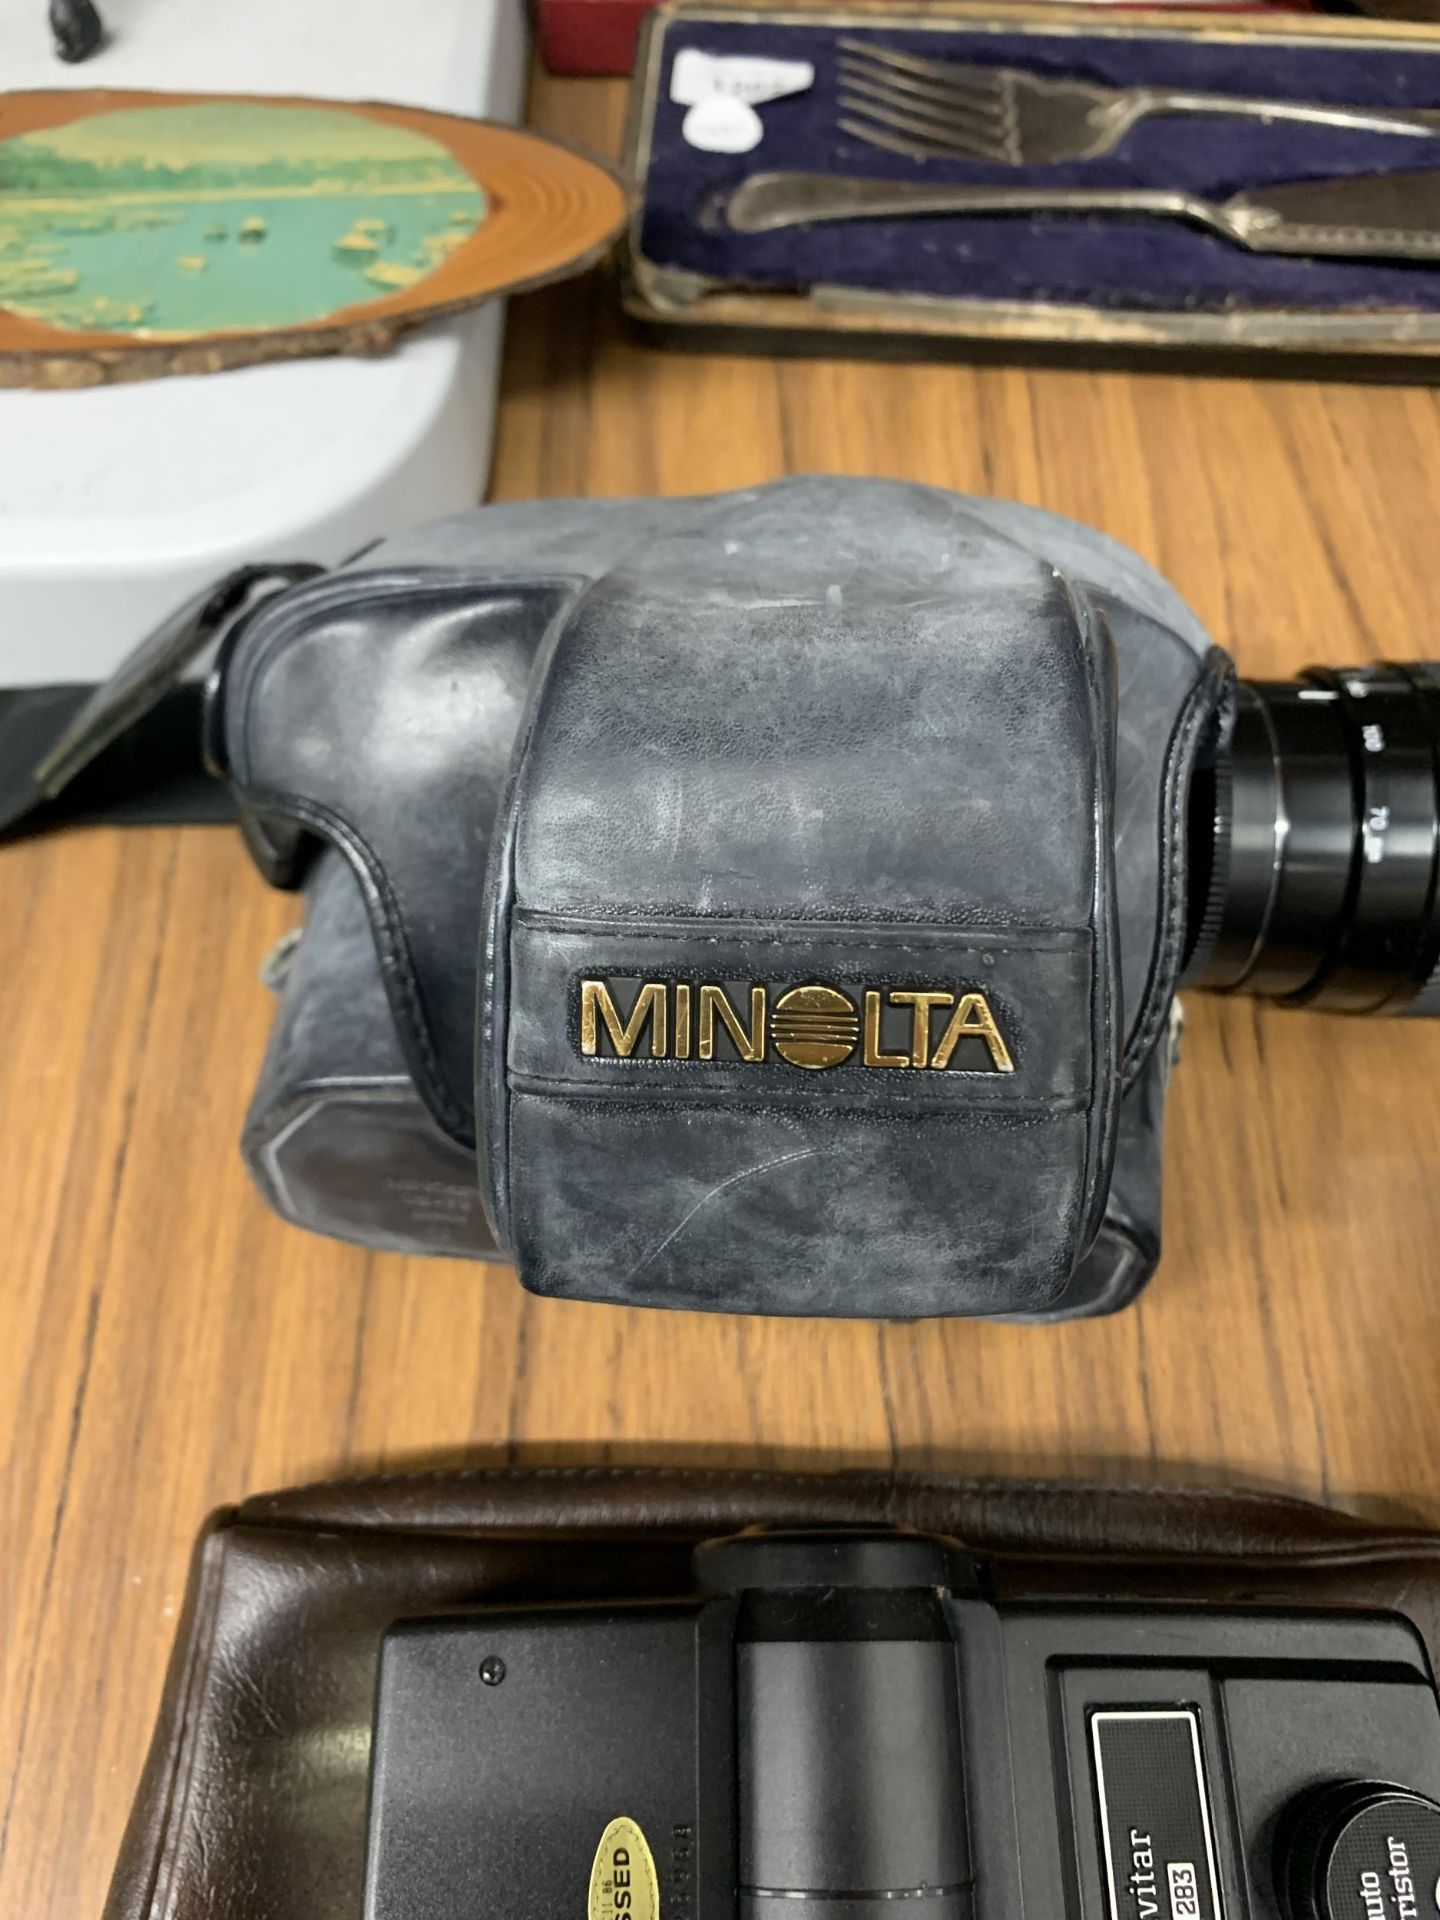 A CASED MINOLTA CAMERA WITH EXTRA LENS AND FLASHES - Image 3 of 4